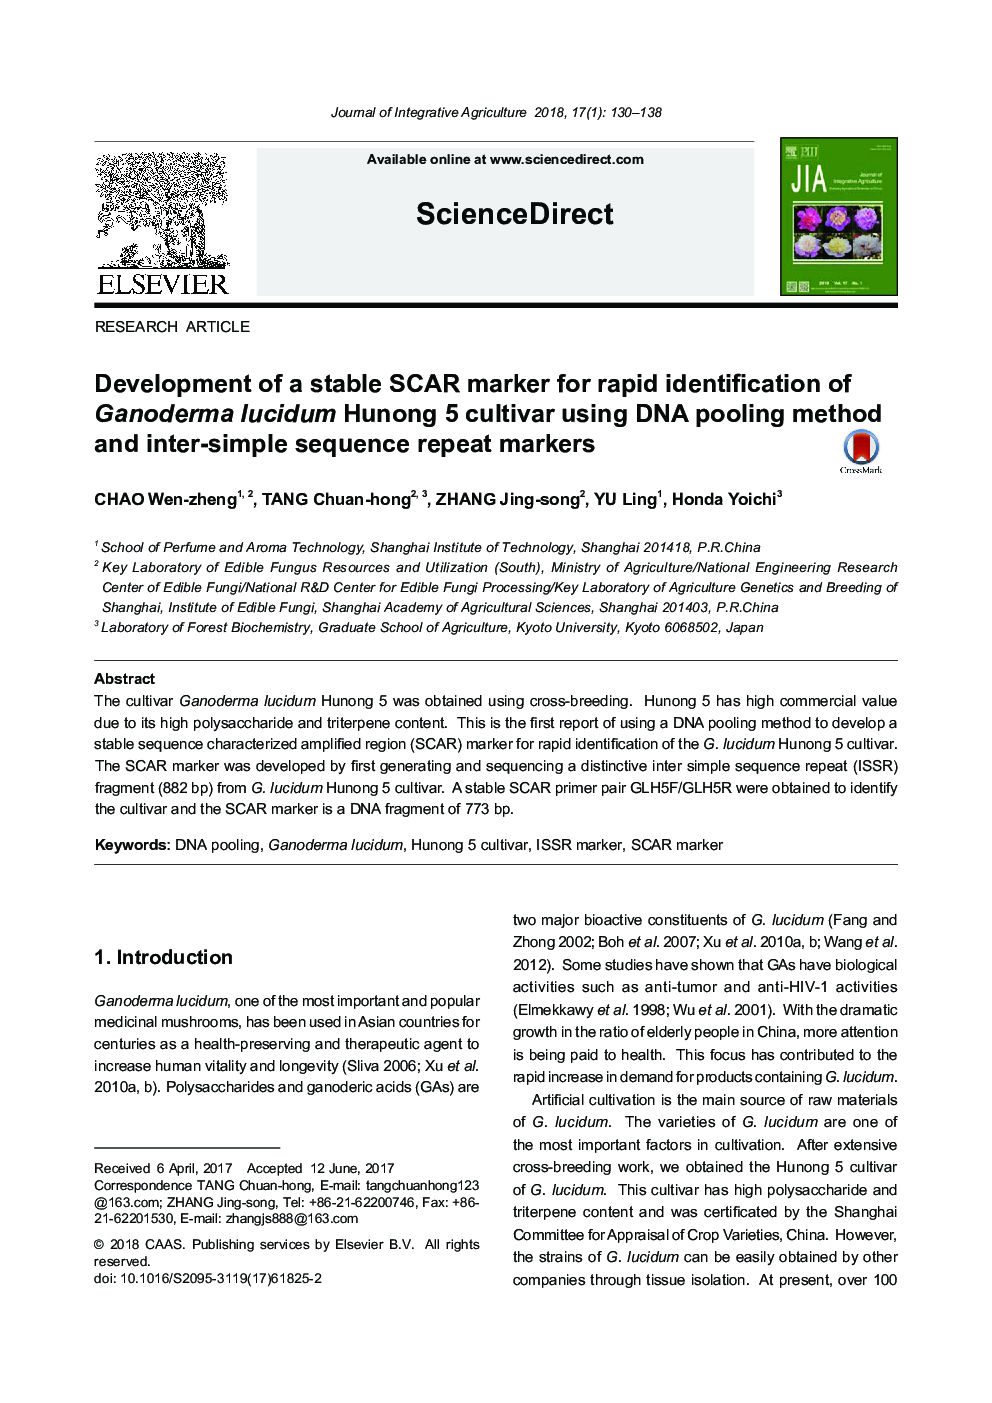 Development of a stable SCAR marker for rapid identification of Ganoderma lucidum Hunong 5 cultivar using DNA pooling method and inter-simple sequence repeat markers